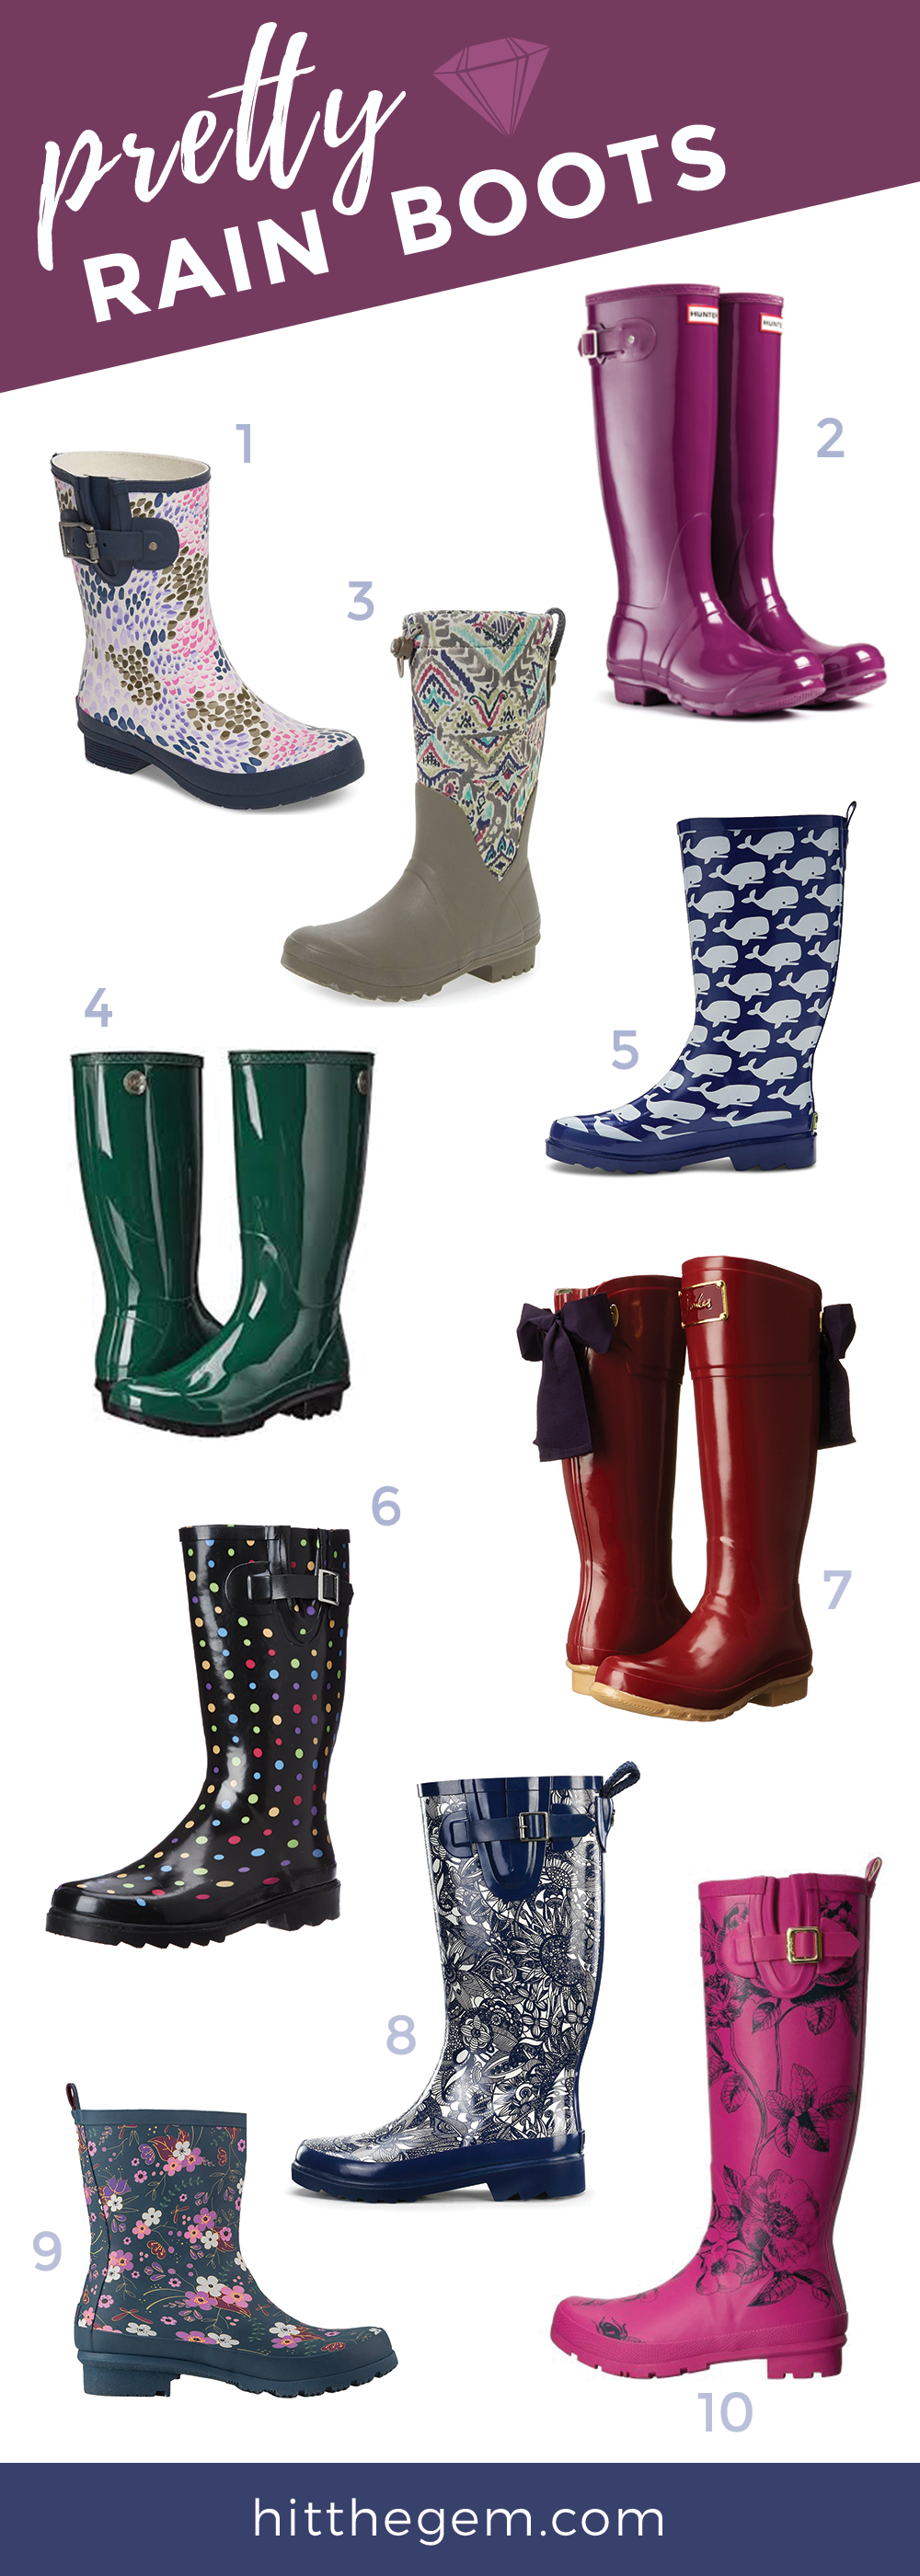 Rainy days suck. A little rain here and there is okay, but constant rain for like a week straight is just depressing. So, how do I keep myself motivated and social on those rainy days? By wearing cute rain boots, of course! I've compiled some of my favorites for you Gems so you can beat those rainy days blues, too!